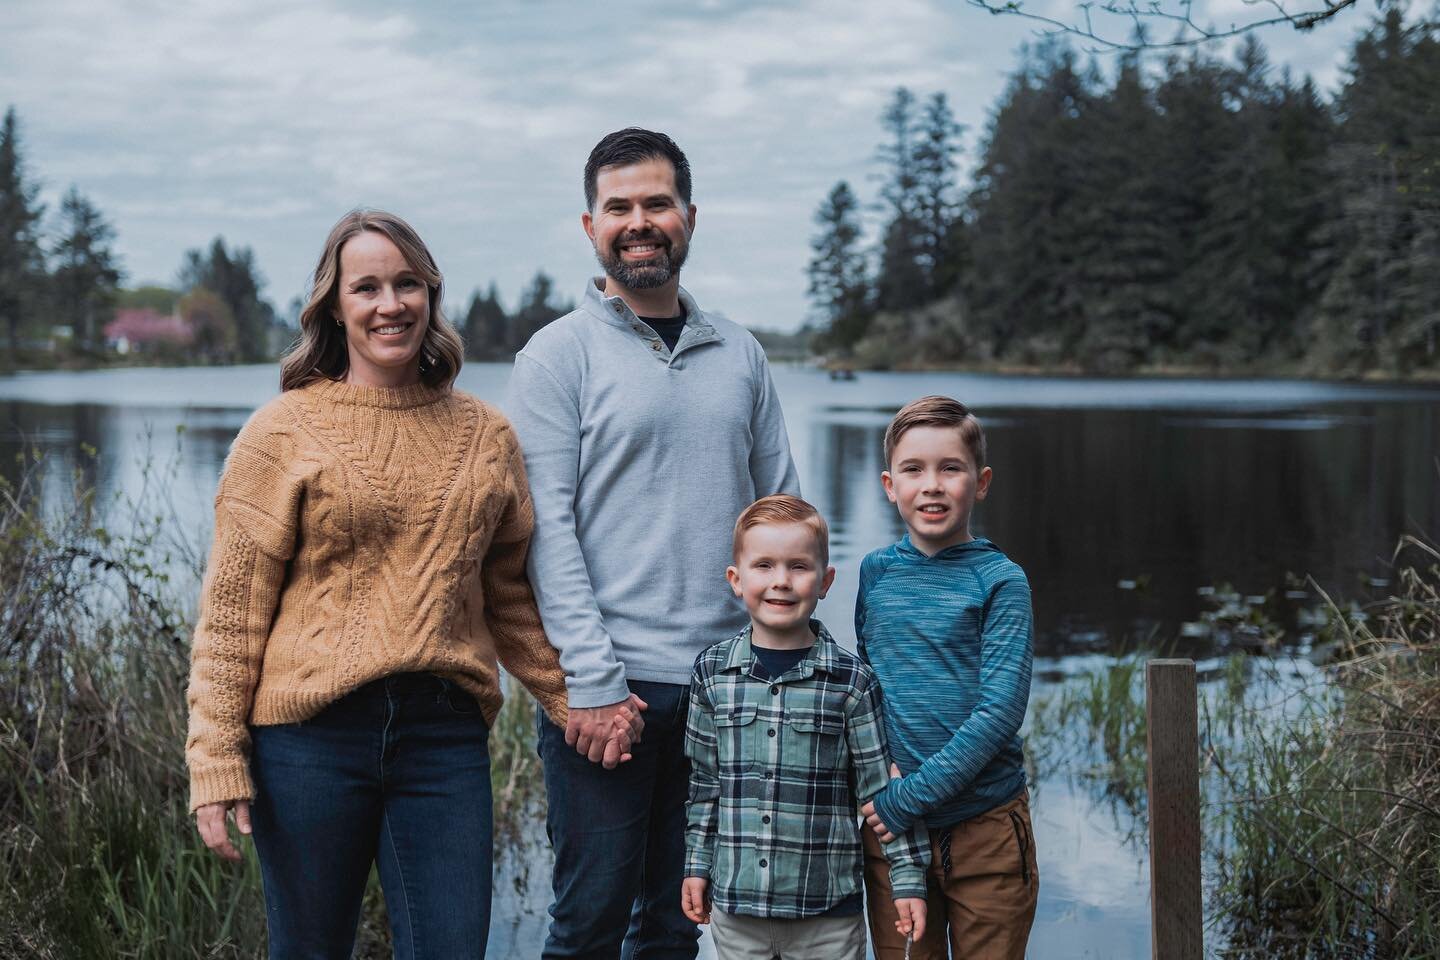 Family photo Friday?? Family Foto Friday?? Should we make that a thing?
Either way it&rsquo;s Friday and I&rsquo;m posting a family session I got to do recently!!

#familyphotos #familyphotofriday #familyfotofriday #photographer #photography #wa #pnw